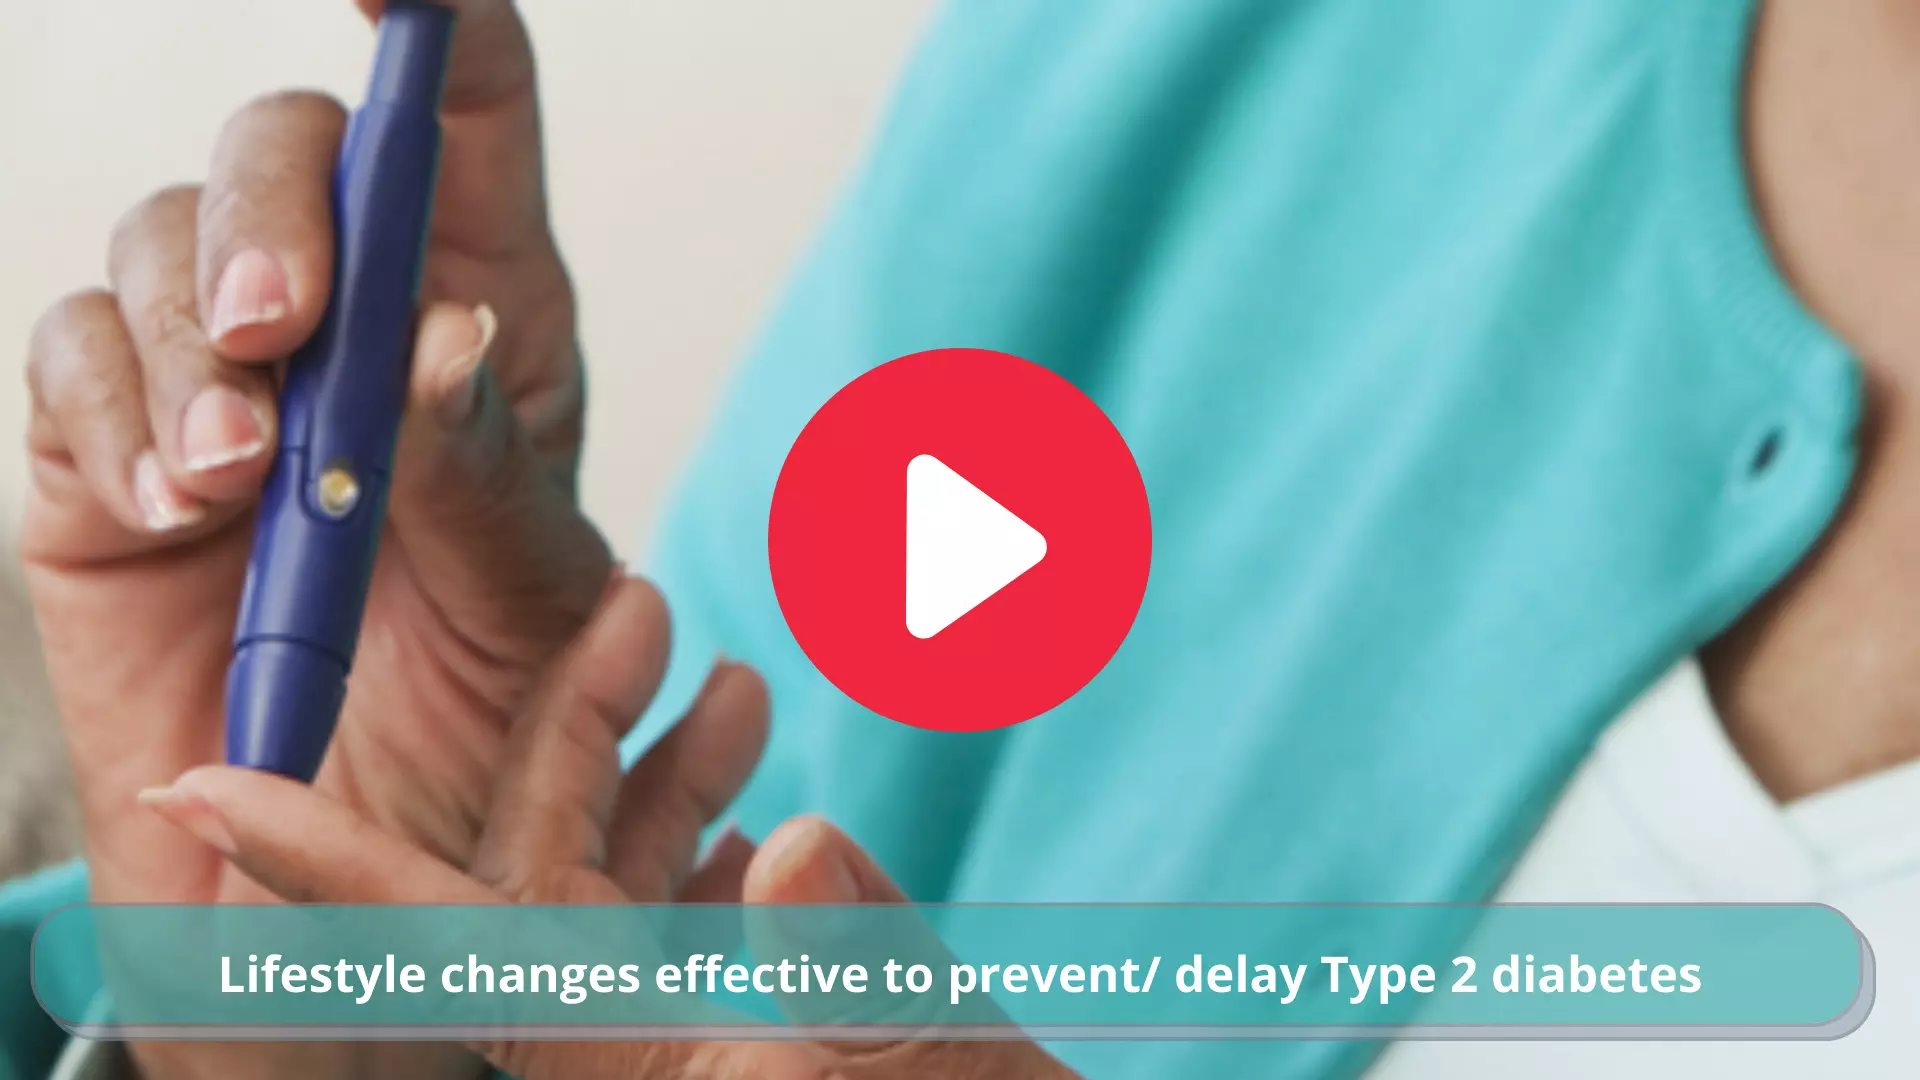 Lifestyle changes effective to prevent/ delay Type 2 diabetes